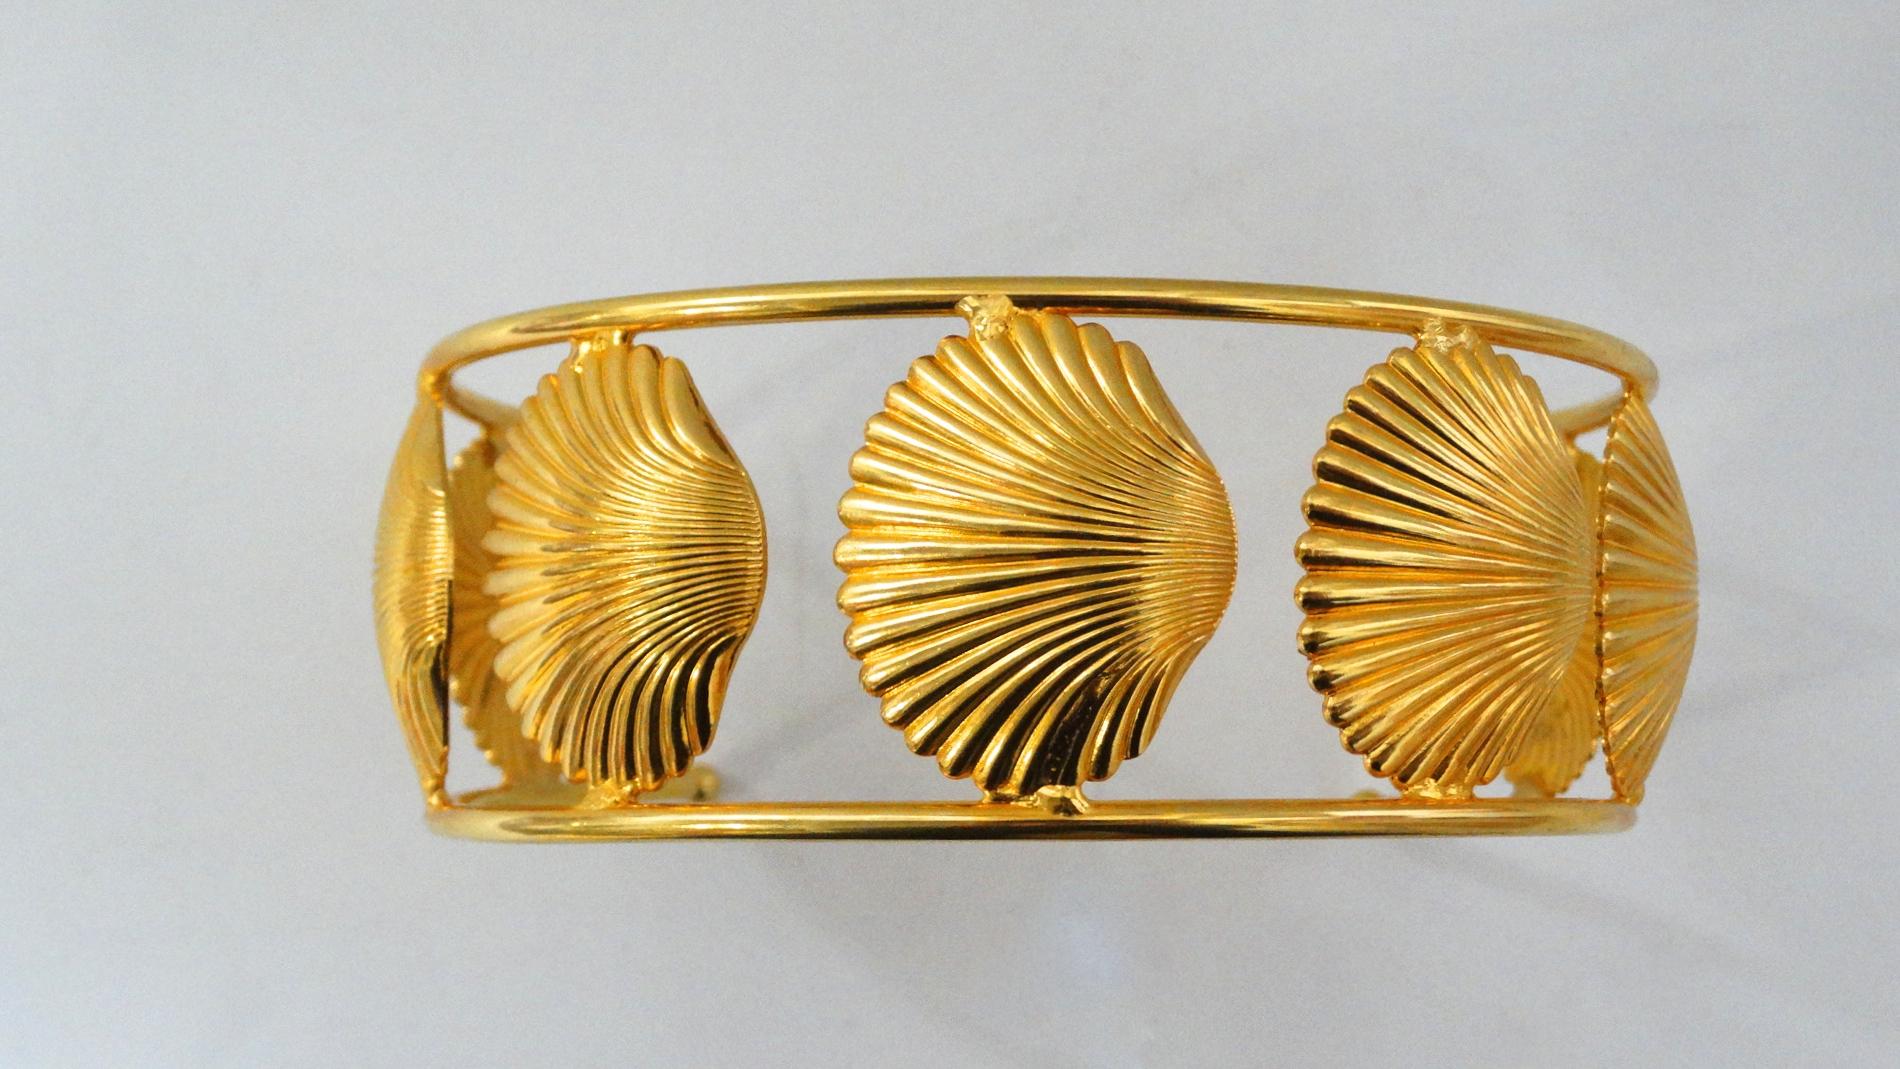 The Perfect Choker To Elevate Your Look Is Here! Circa 1970s, this William de Lillo statement choker is a U shape for easy wear and is plated gold. Features scallop seashells around choker. Has beautiful detail and structure. The perfect piece for